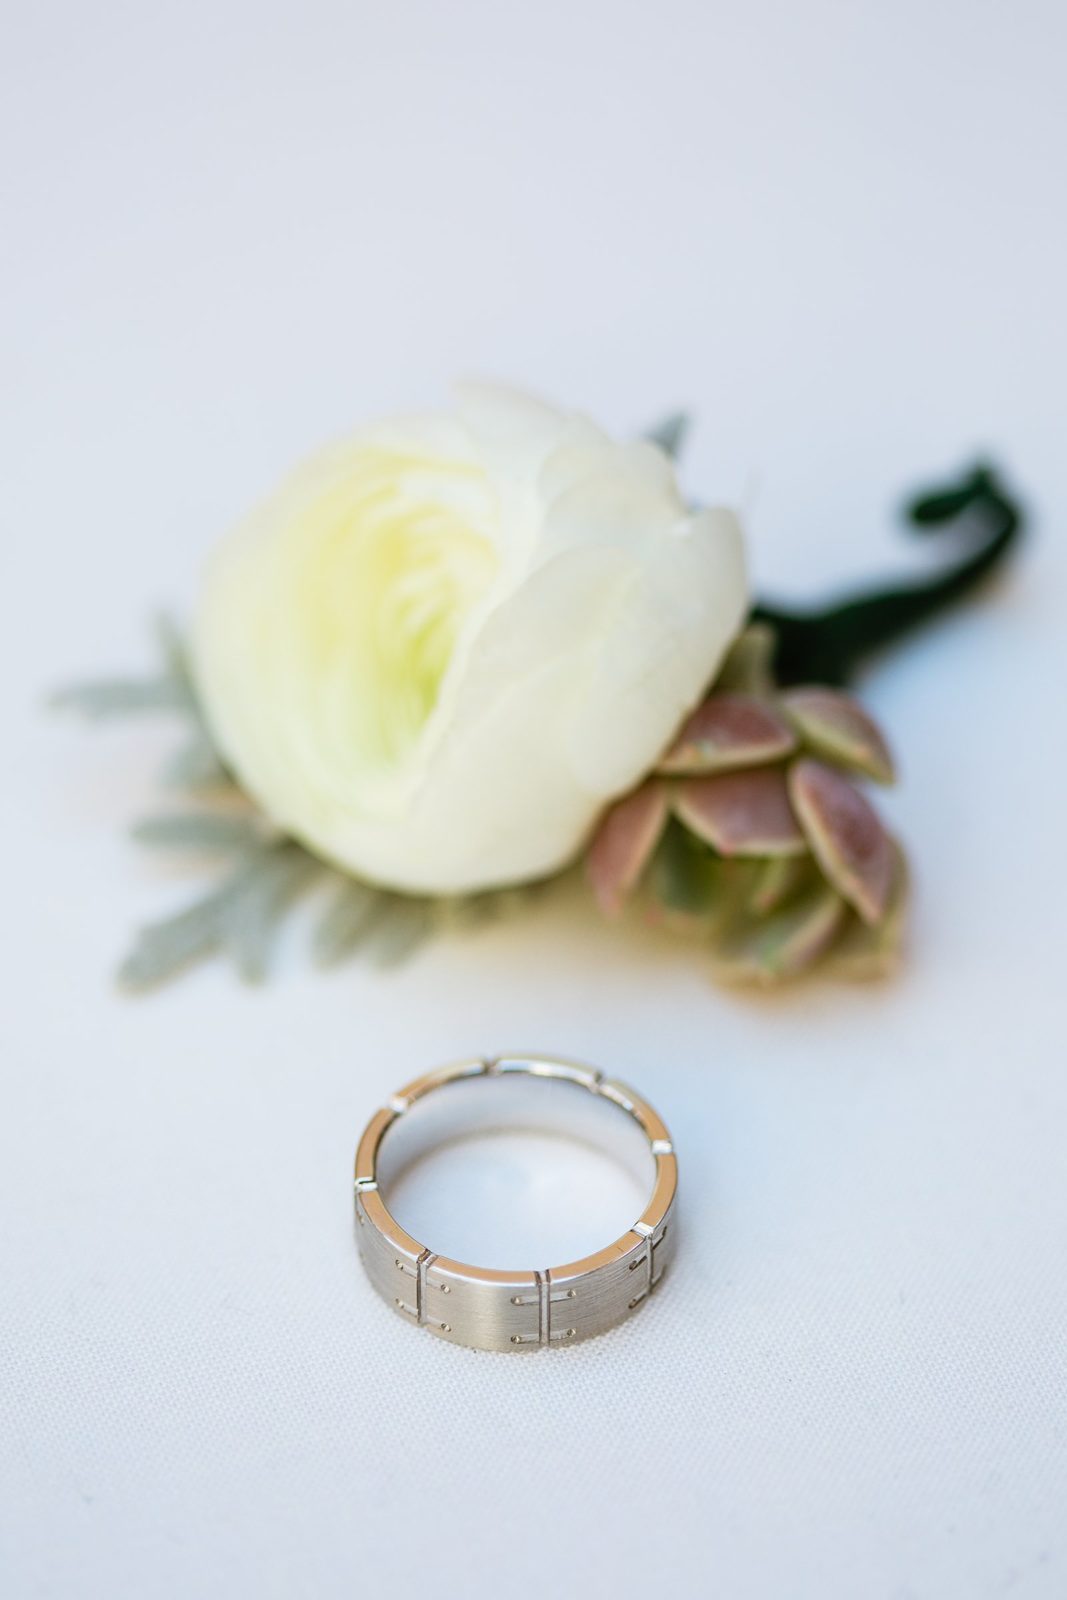 Groom's unique wedding band by PMA Photography.